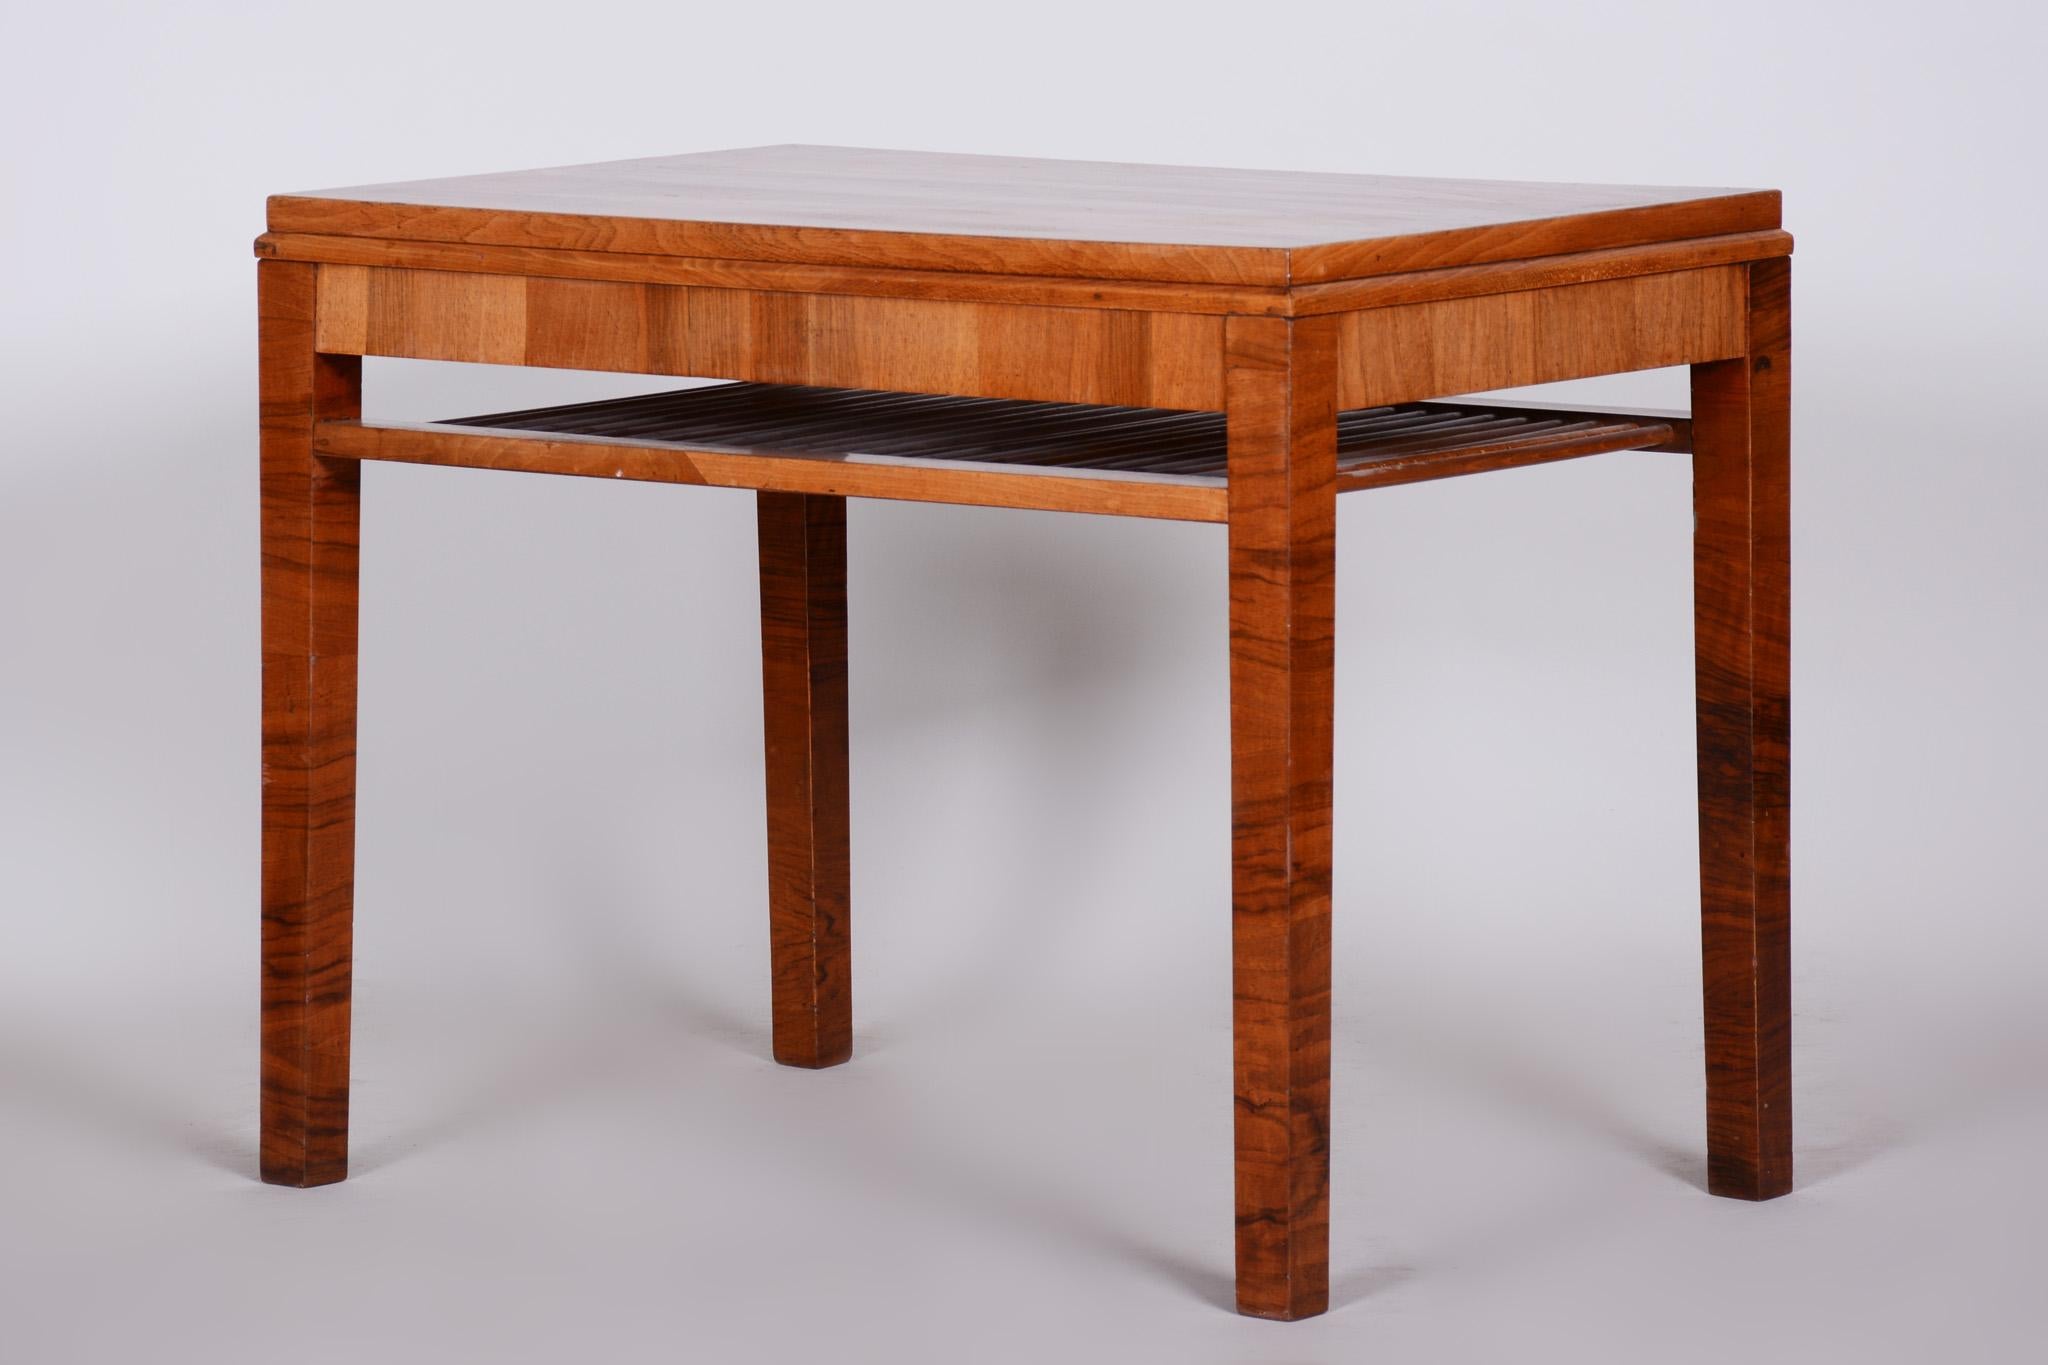 Completely Restored Unusual Brown Art Deco Walnut Coffee Table, Czechia, 1930s In Good Condition For Sale In Horomerice, CZ